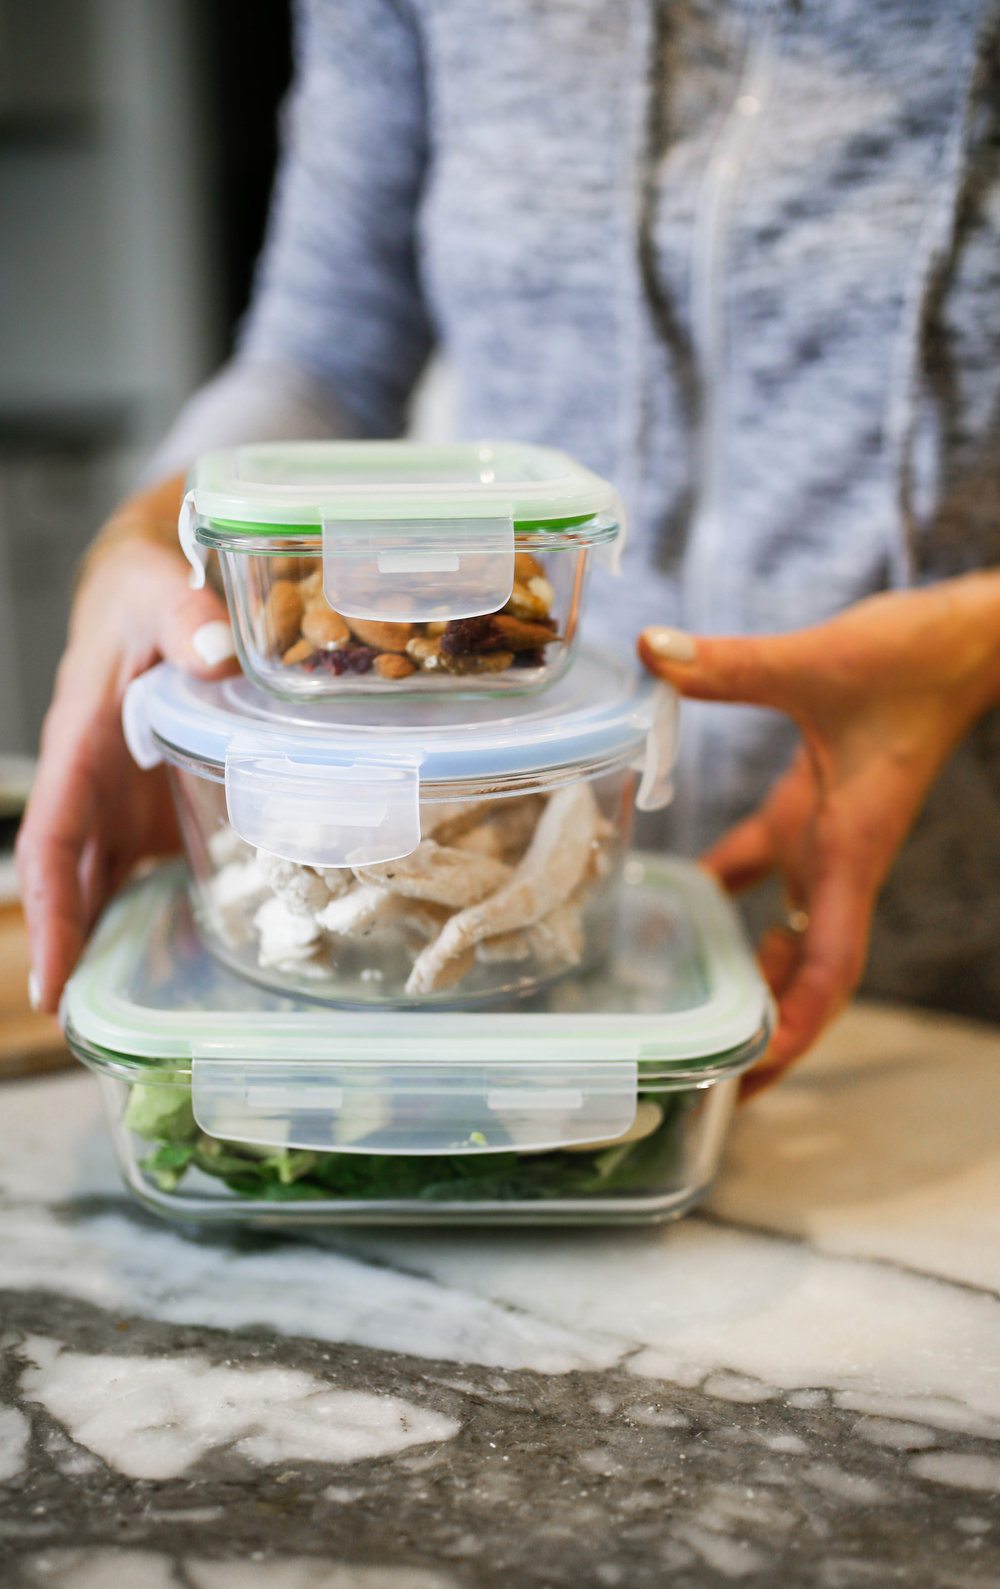  healthy food stacked in glass storage containers 